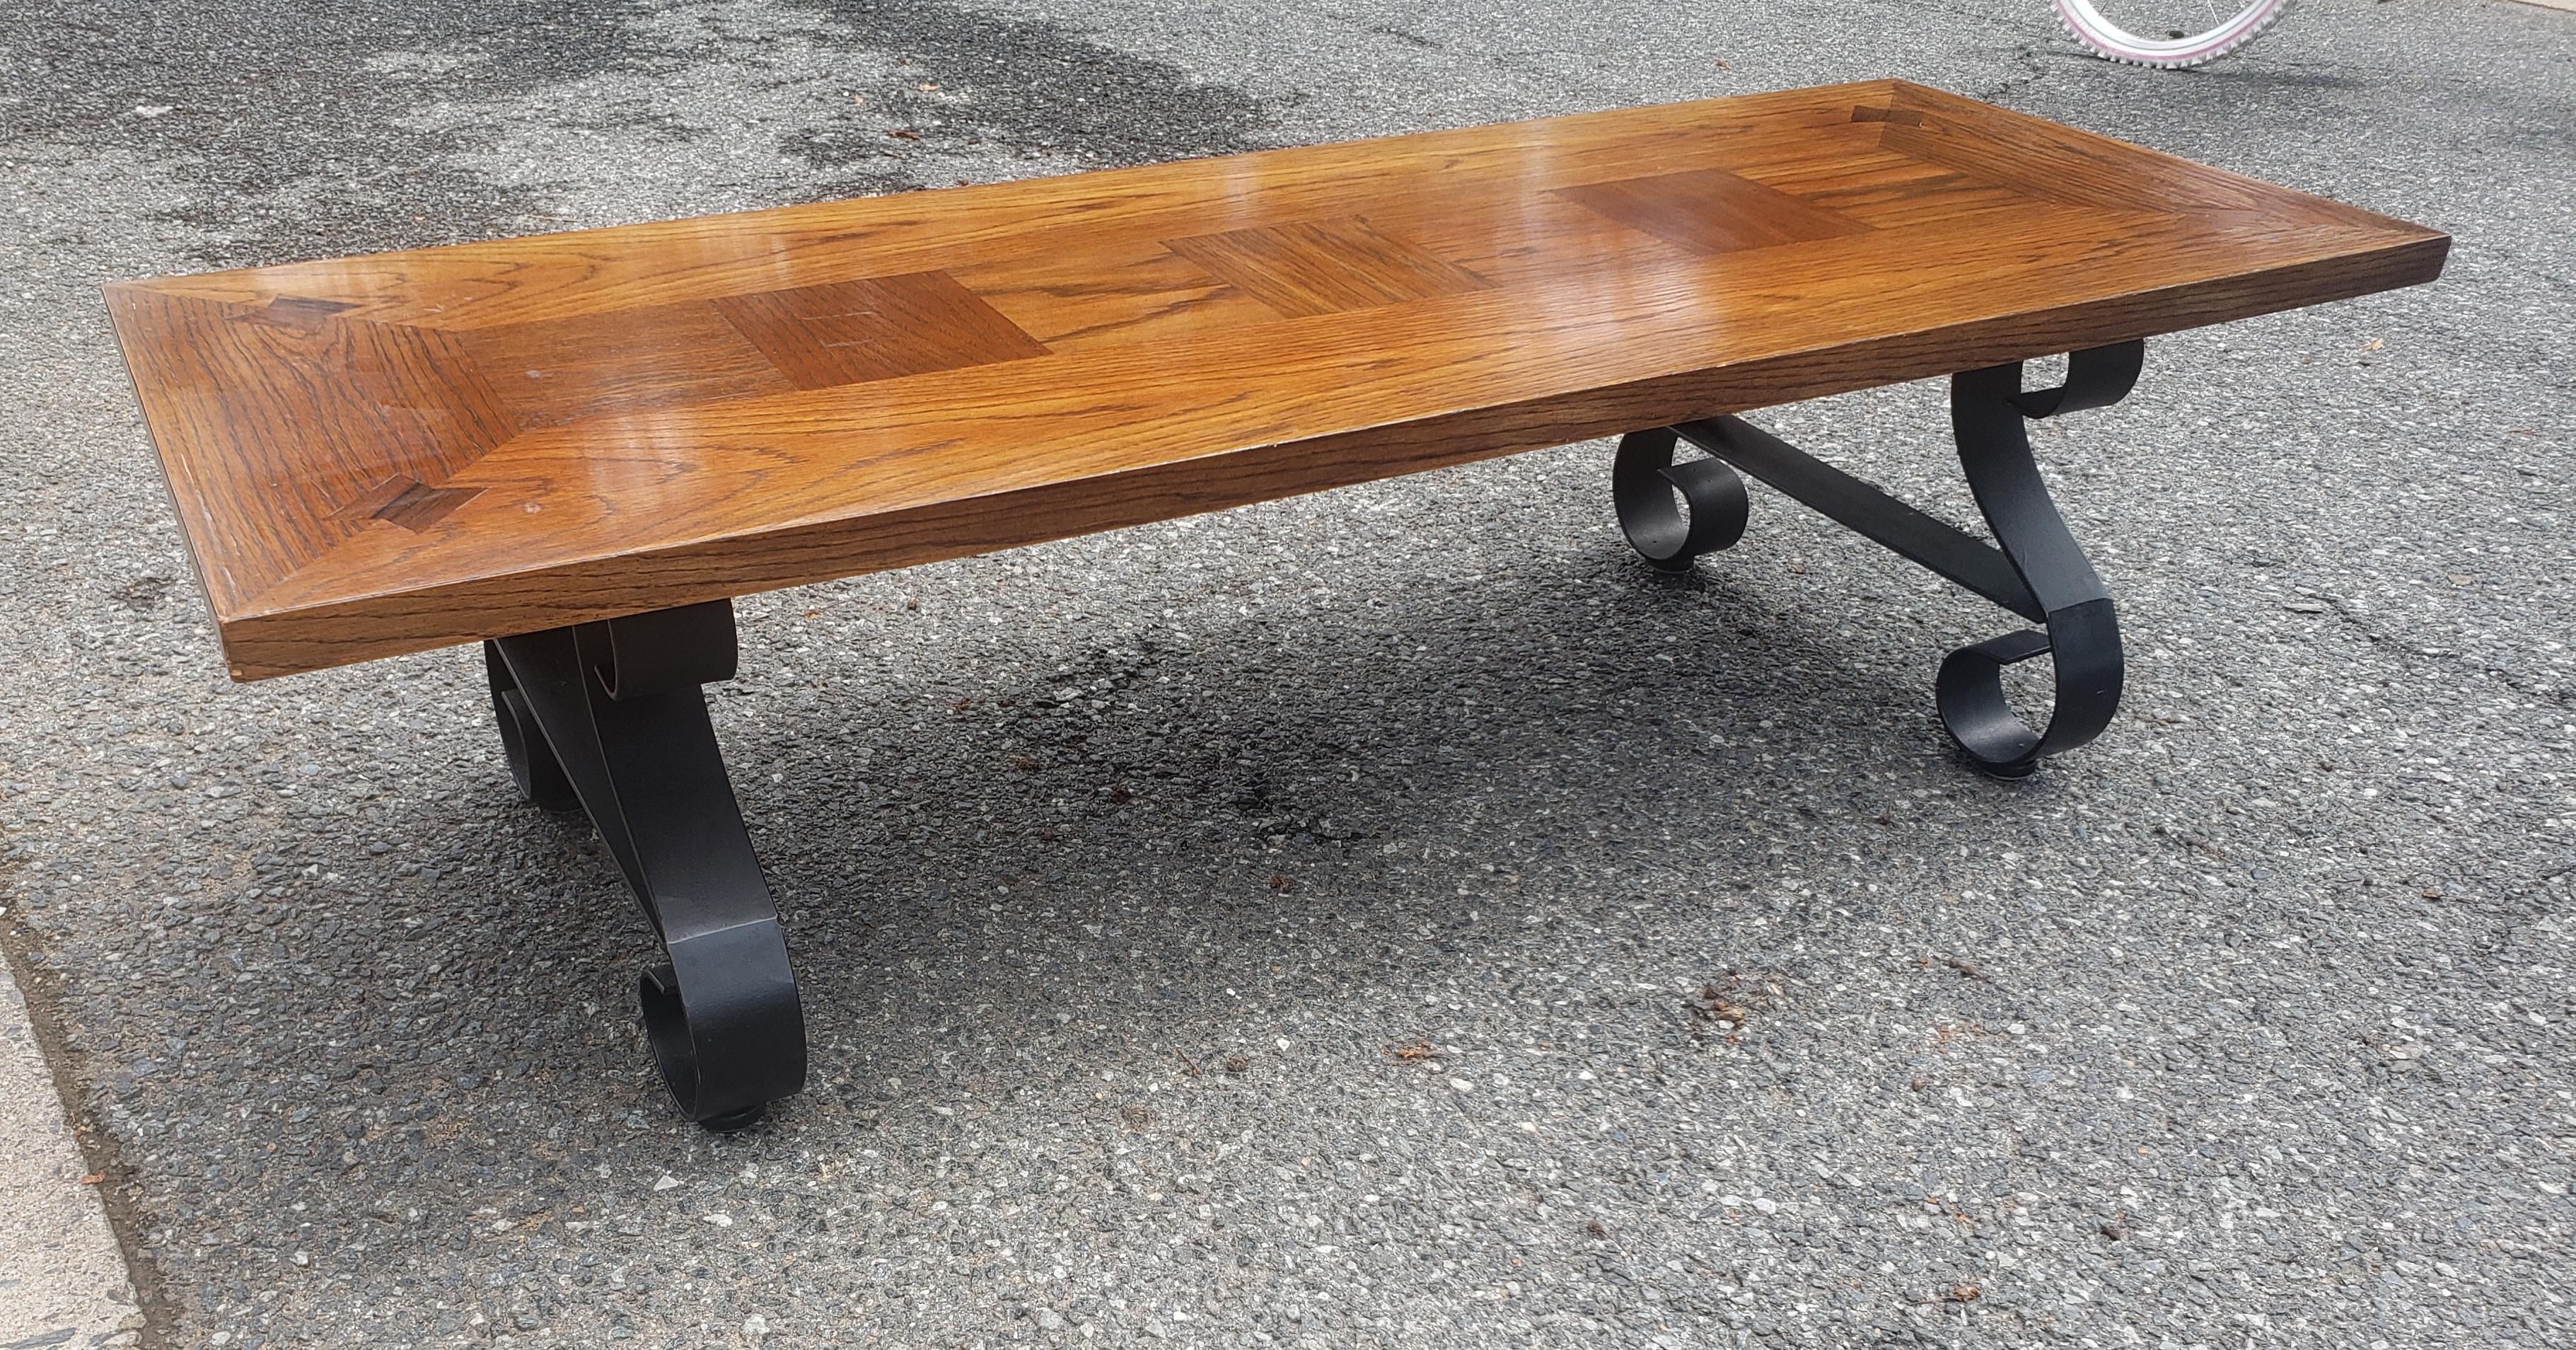 1960s Lane Furniture Brutalist Oak Parquetry and Iron Coffee Table In Good Condition For Sale In Germantown, MD